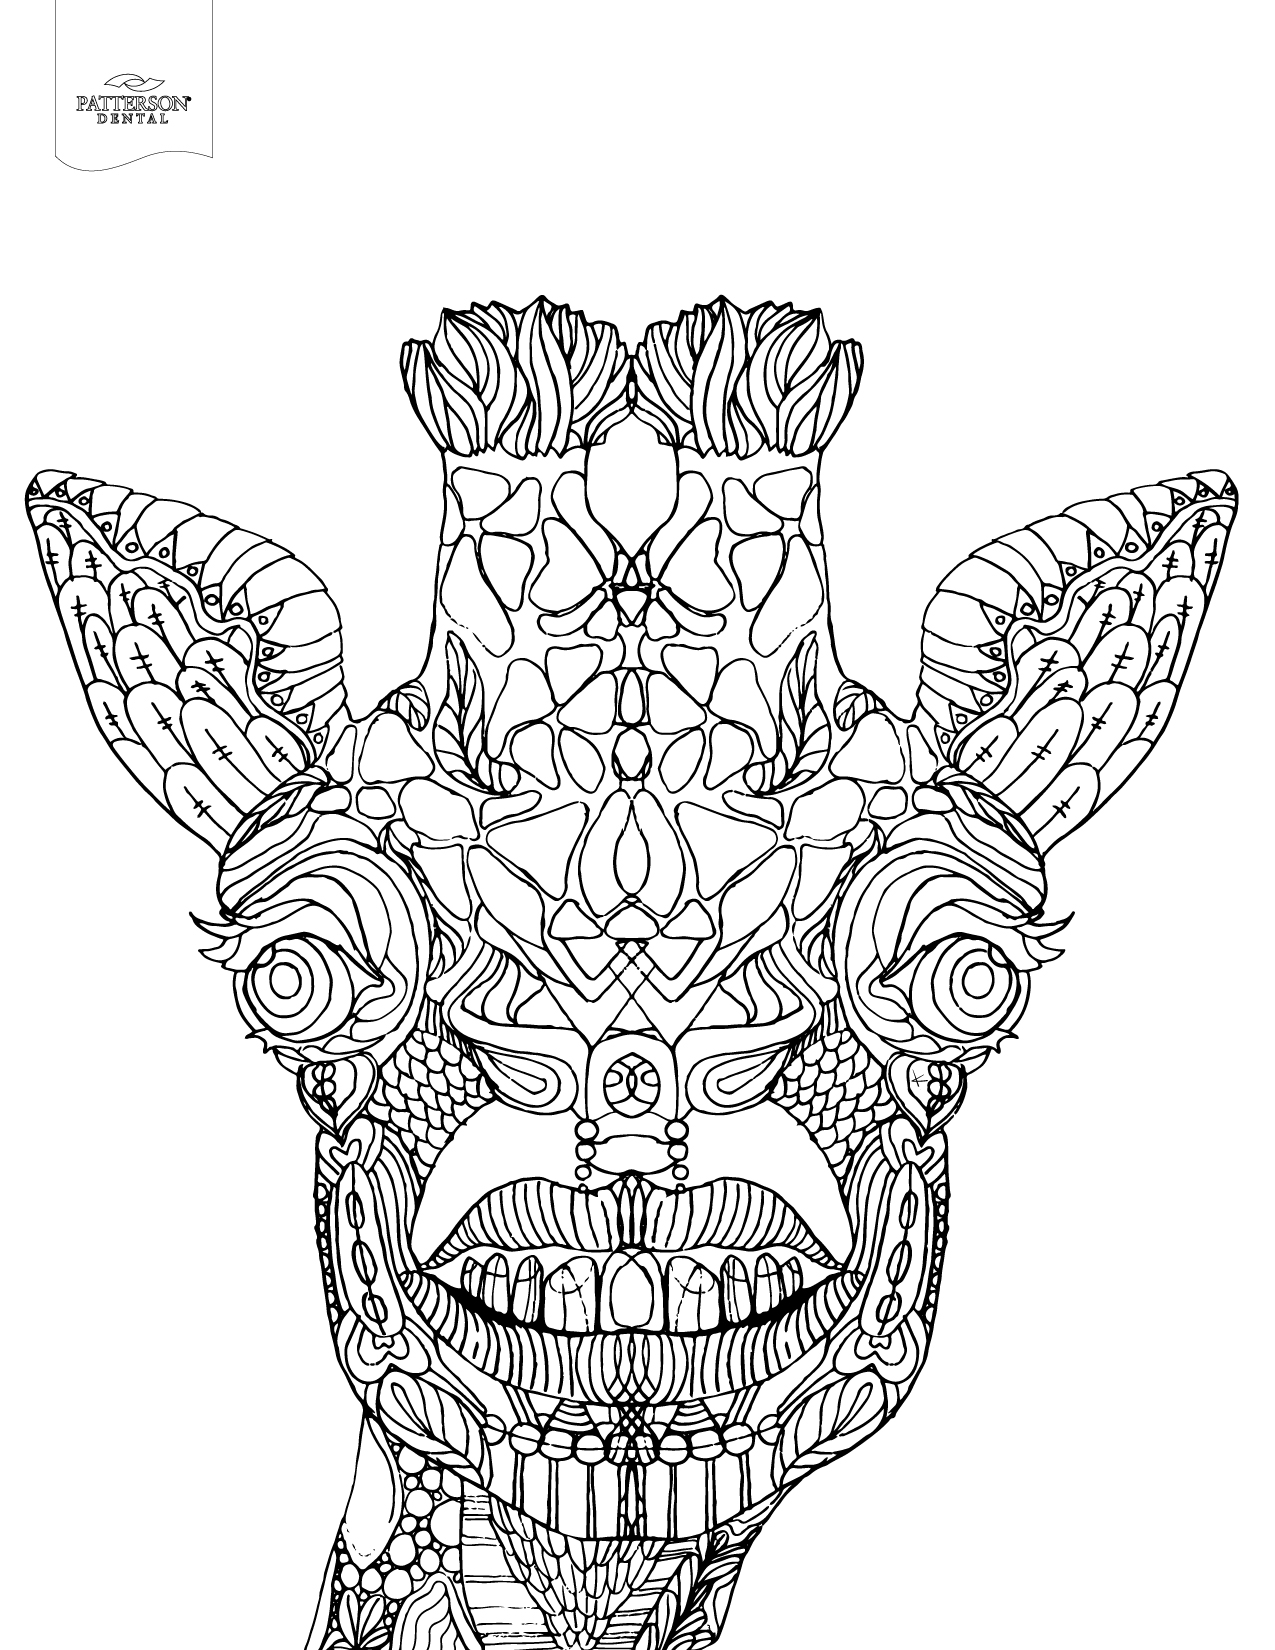 10 Toothy Adult Coloring Pages  Printable Off the Cusp